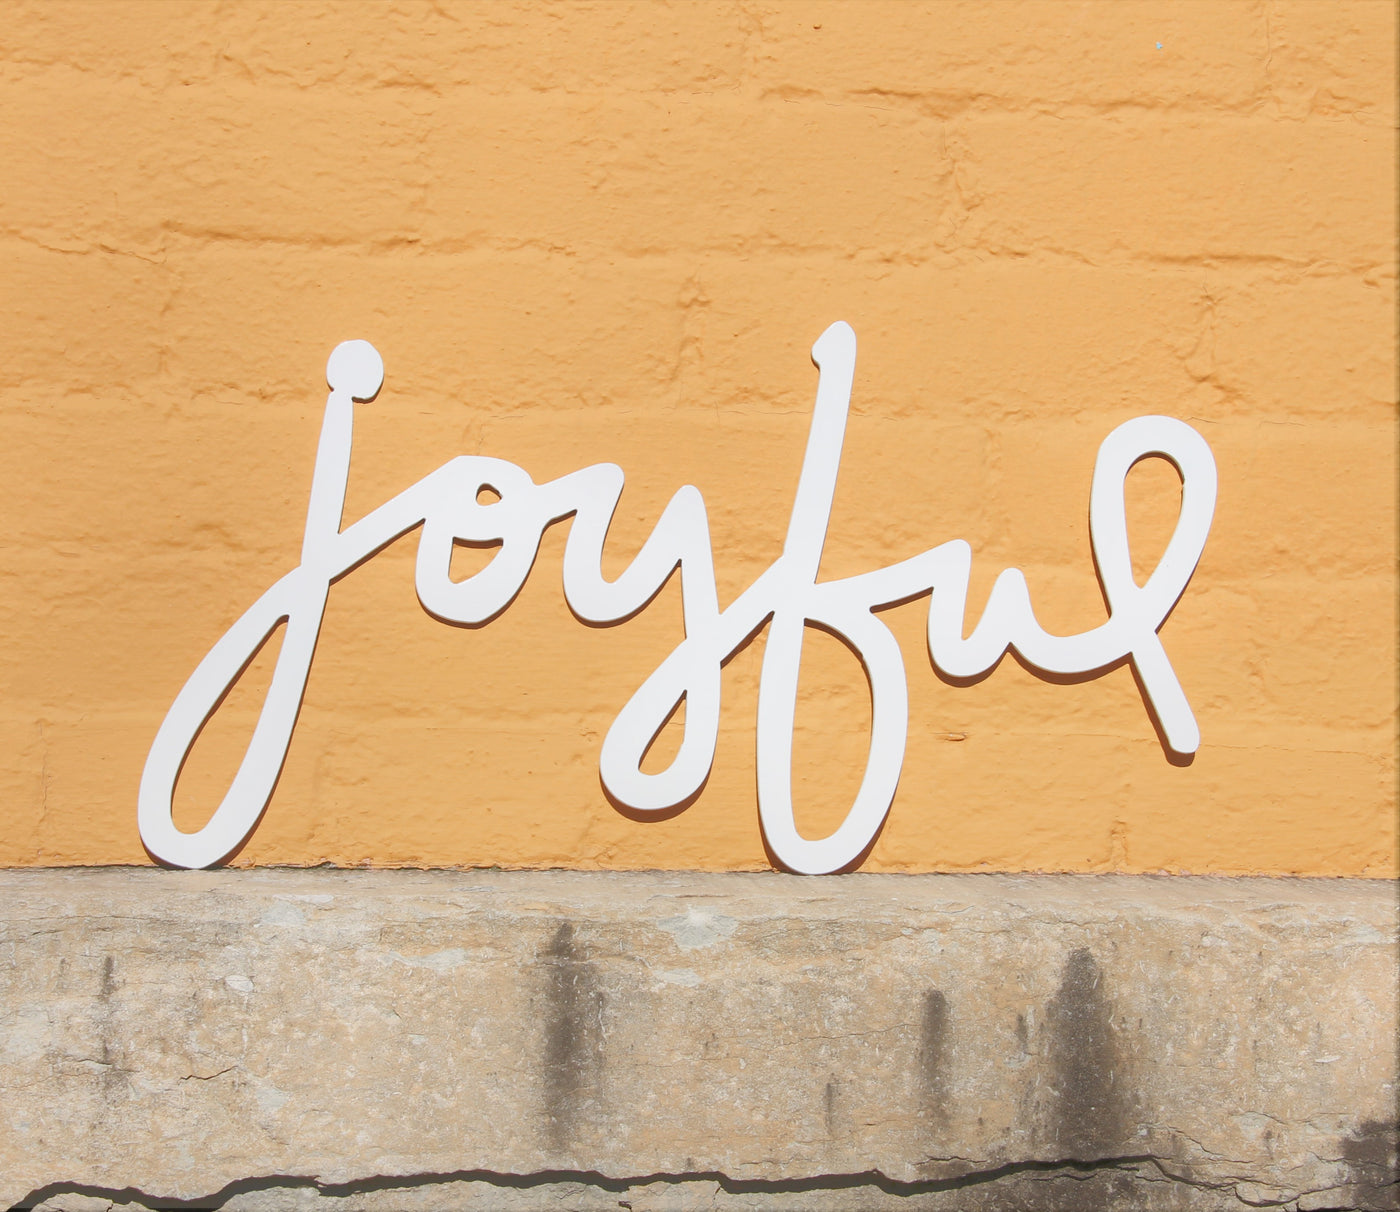 Joyful Metal Word Sign - Madison Iron and Wood - Metal Art - metal outdoor decor - Steel deocrations - american made products - veteran owned business products - fencing decorations - fencing supplies - custom wall decorations - personalized wall signs - steel - decorative post caps - steel post caps - metal post caps - brackets - structural brackets - home improvement - easter - easter decorations - easter gift - easter yard decor